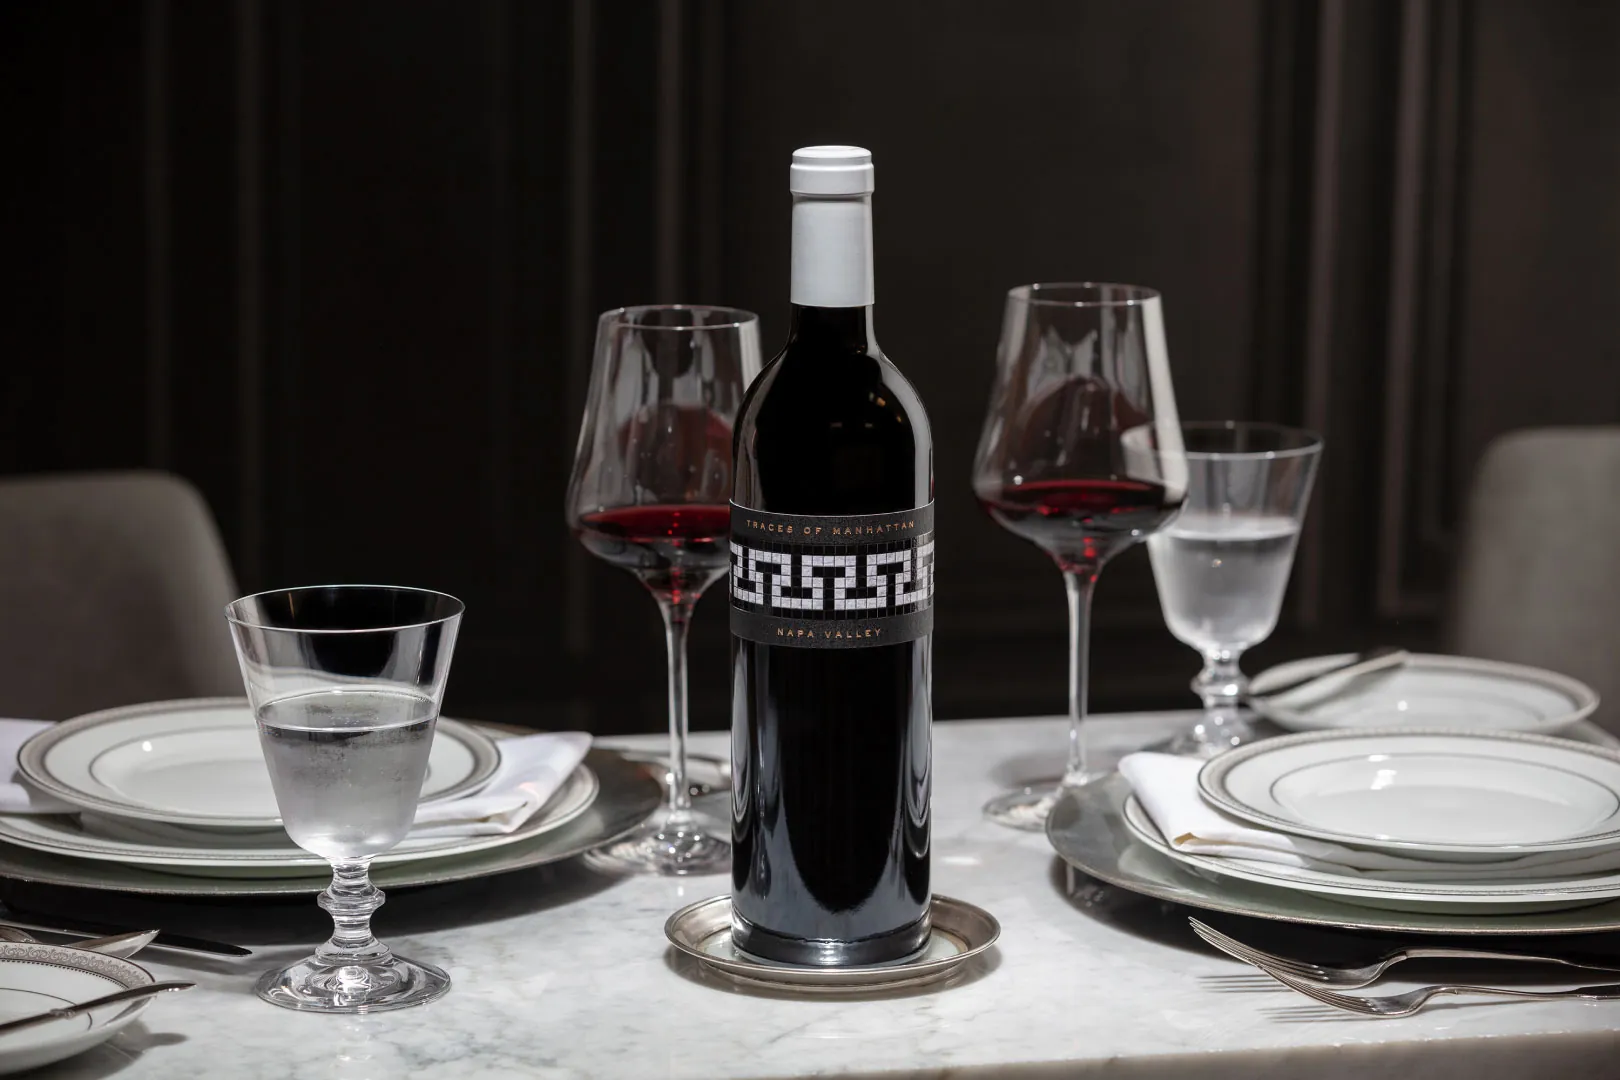 A bottle of wine on a table with glasses and plates.